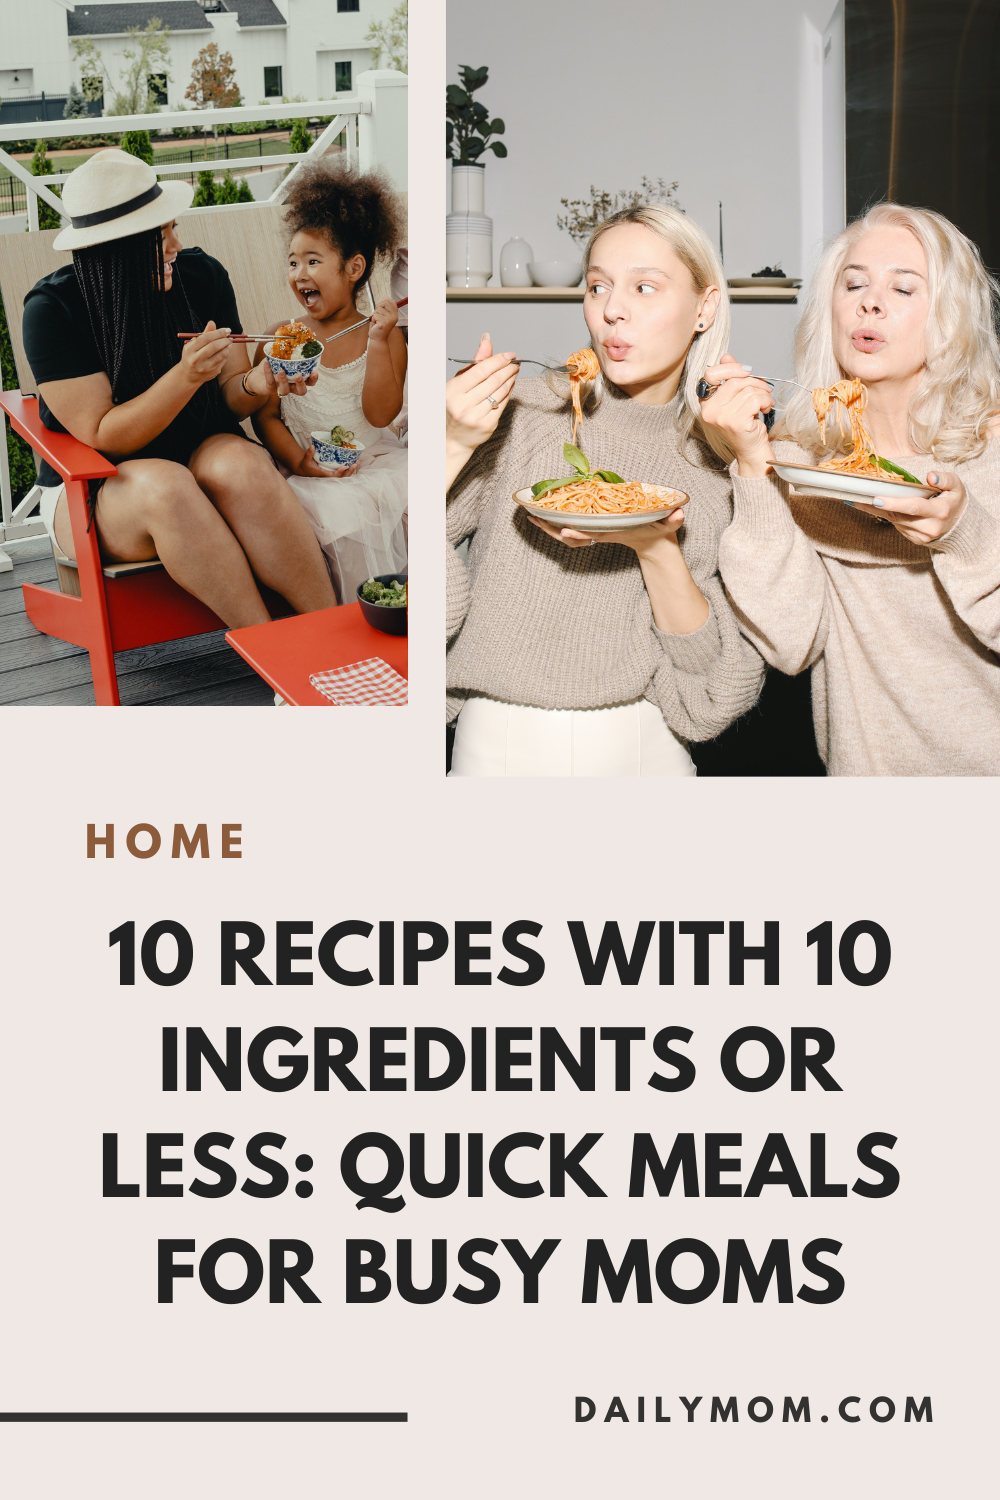 10 Recipes With 10 Ingredients Or Less: Quick Meals For Busy Moms